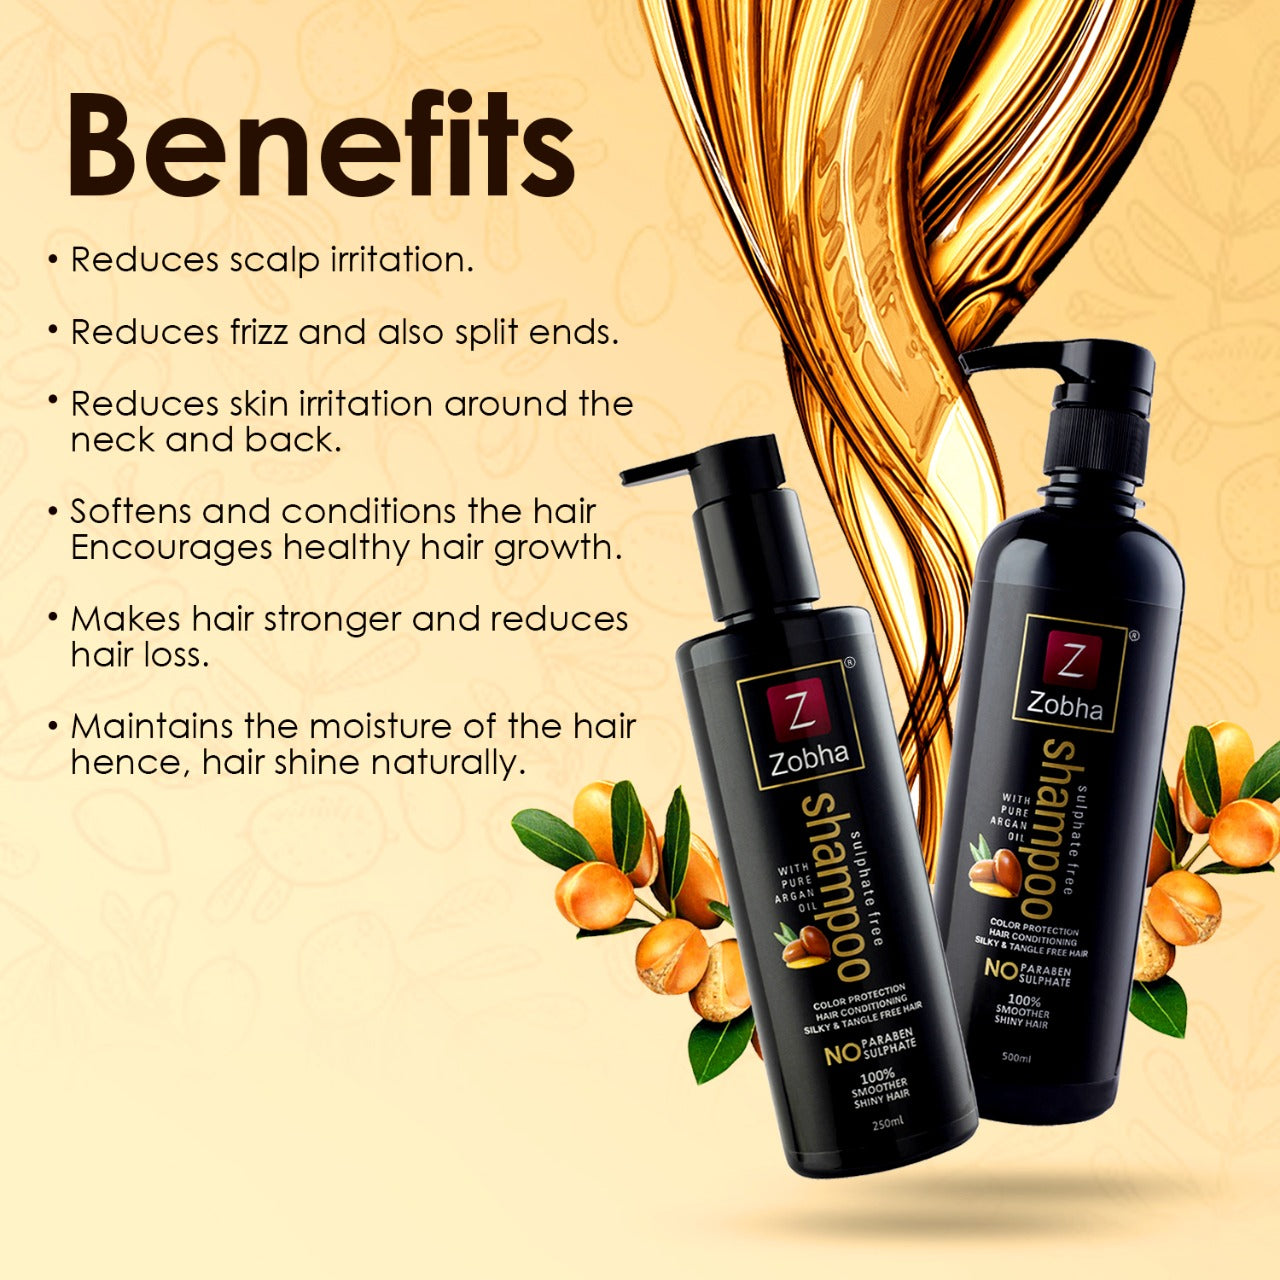 Argan Oil Shampoo - Paraben and Sulphate Free ~ 250ML